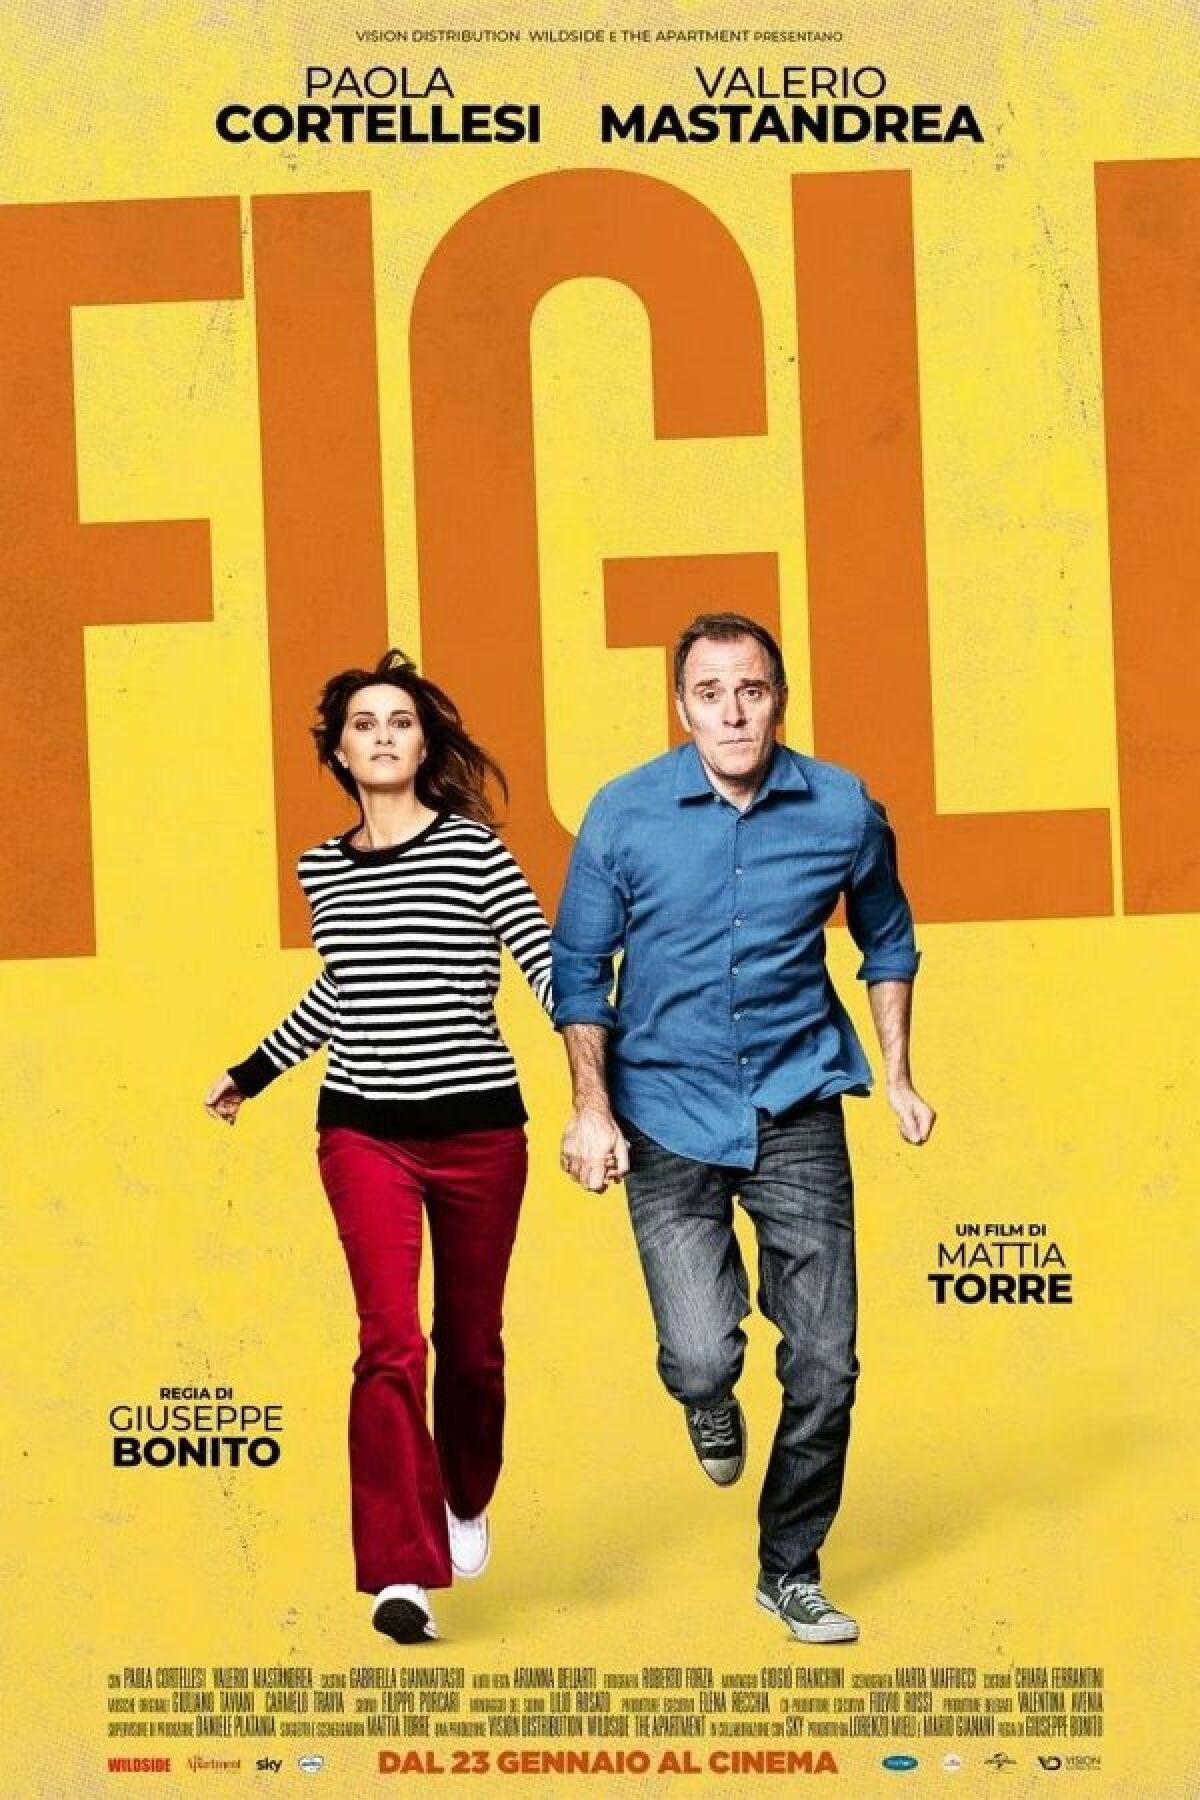 The poster for the sharp comedy “Figli” (Kidz)